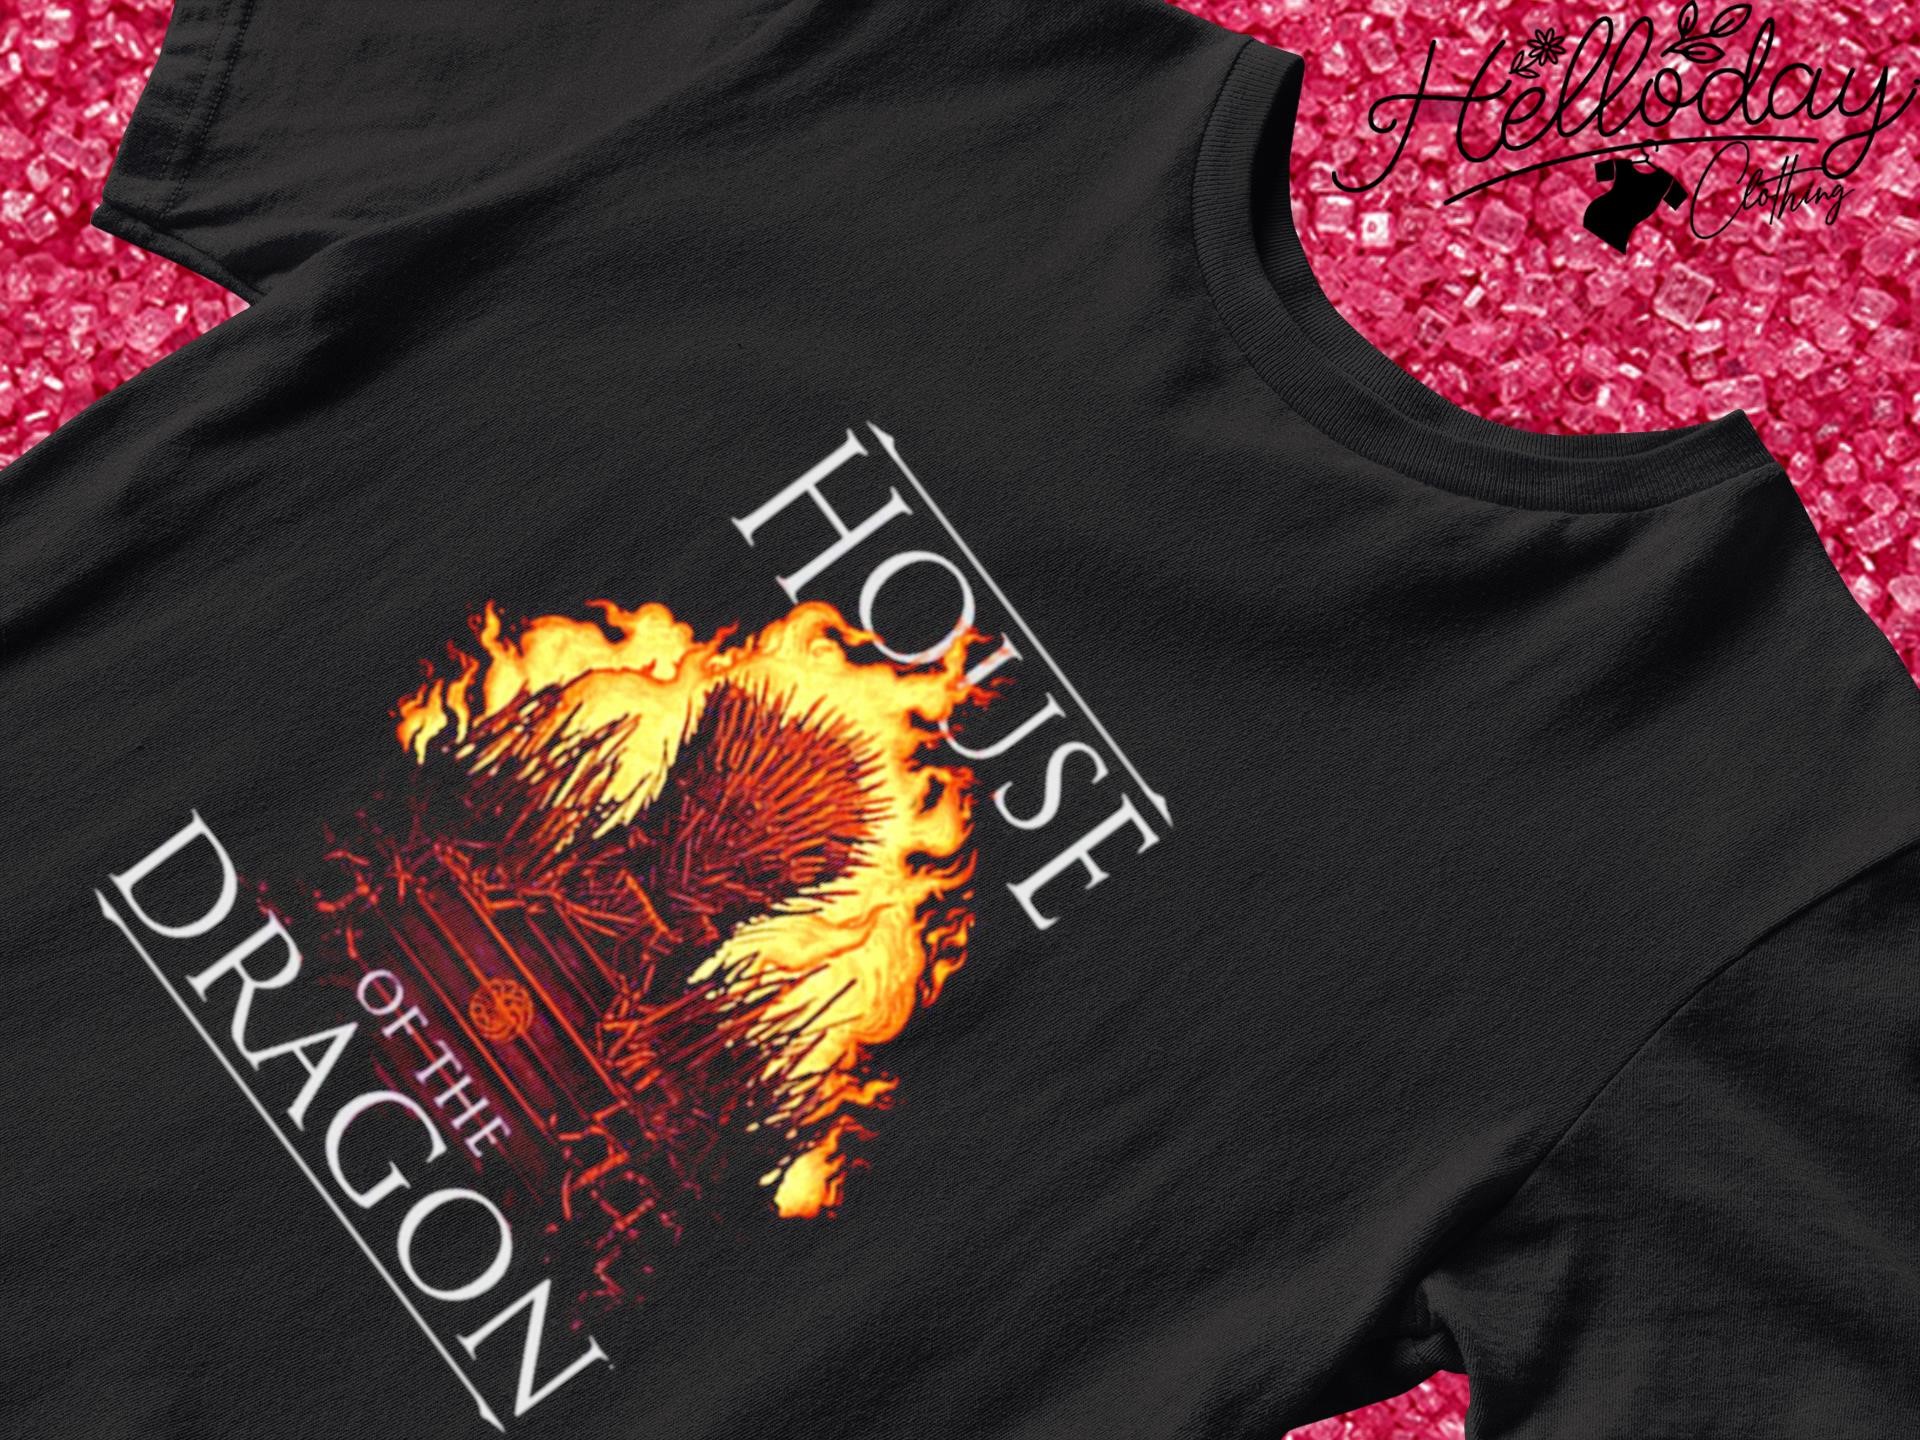 Throne house of the dragon shirt